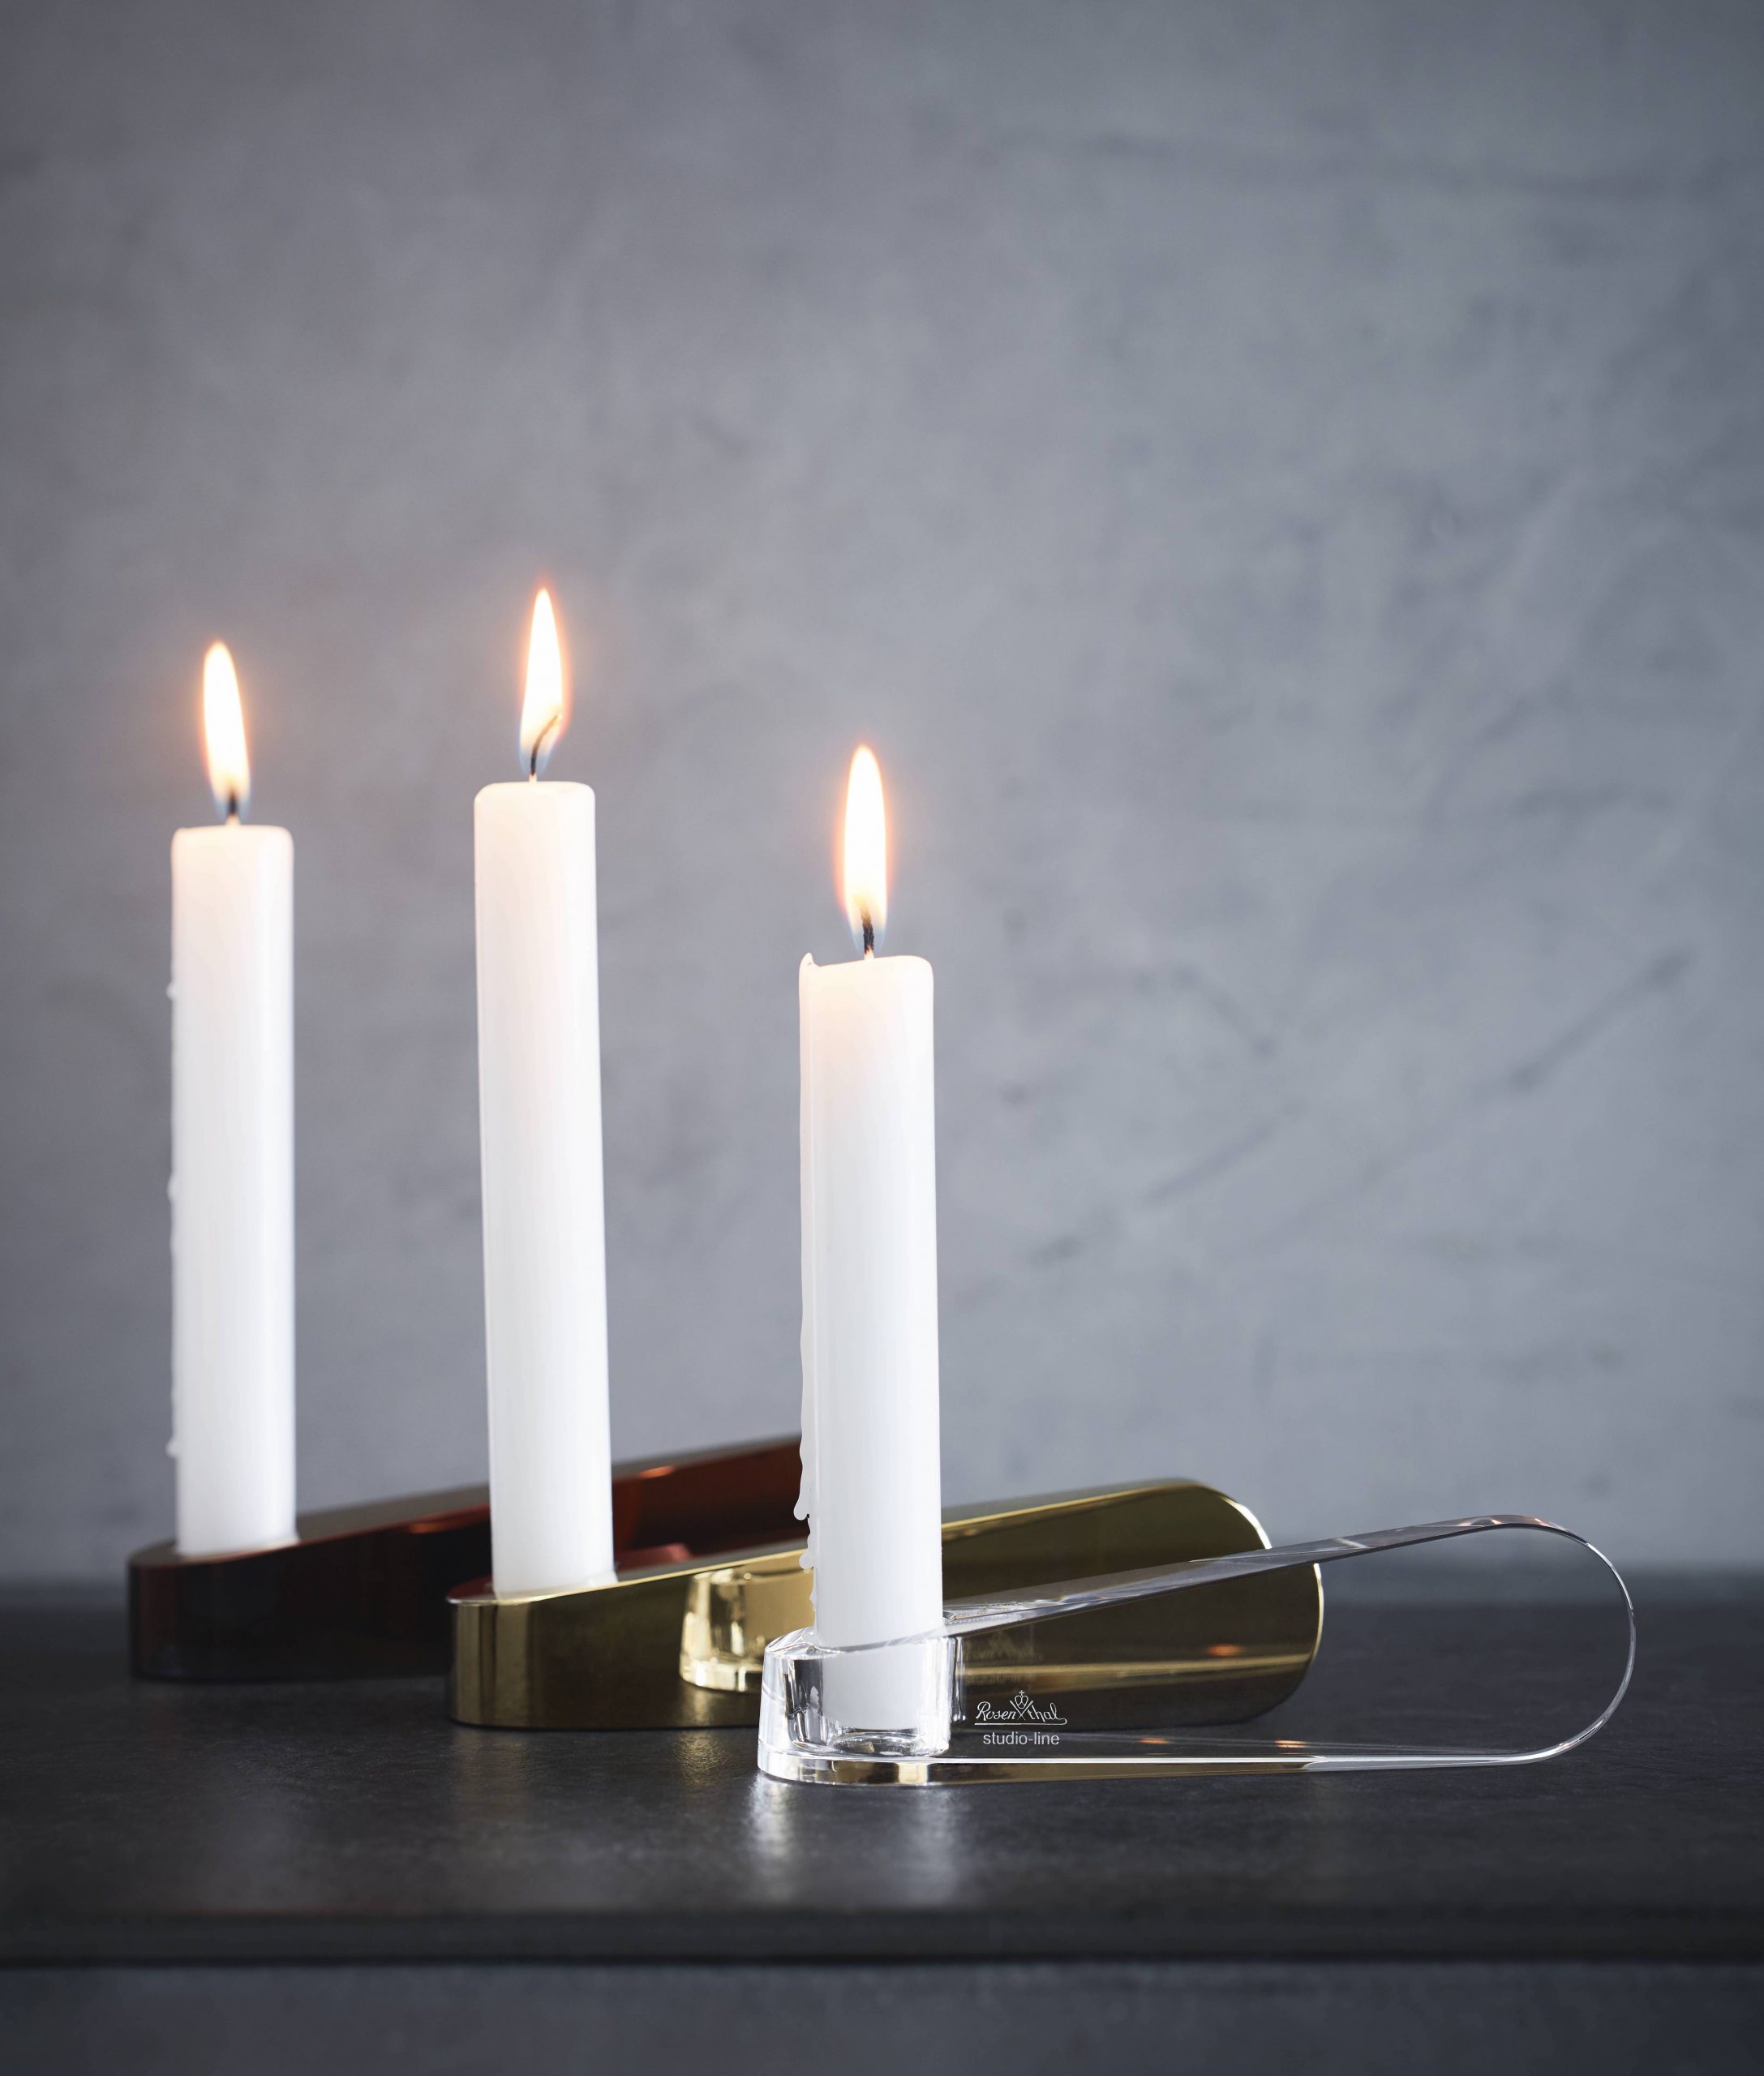 Group of Swan Lights candle holders by Debiasi Sandri for Rosenthal